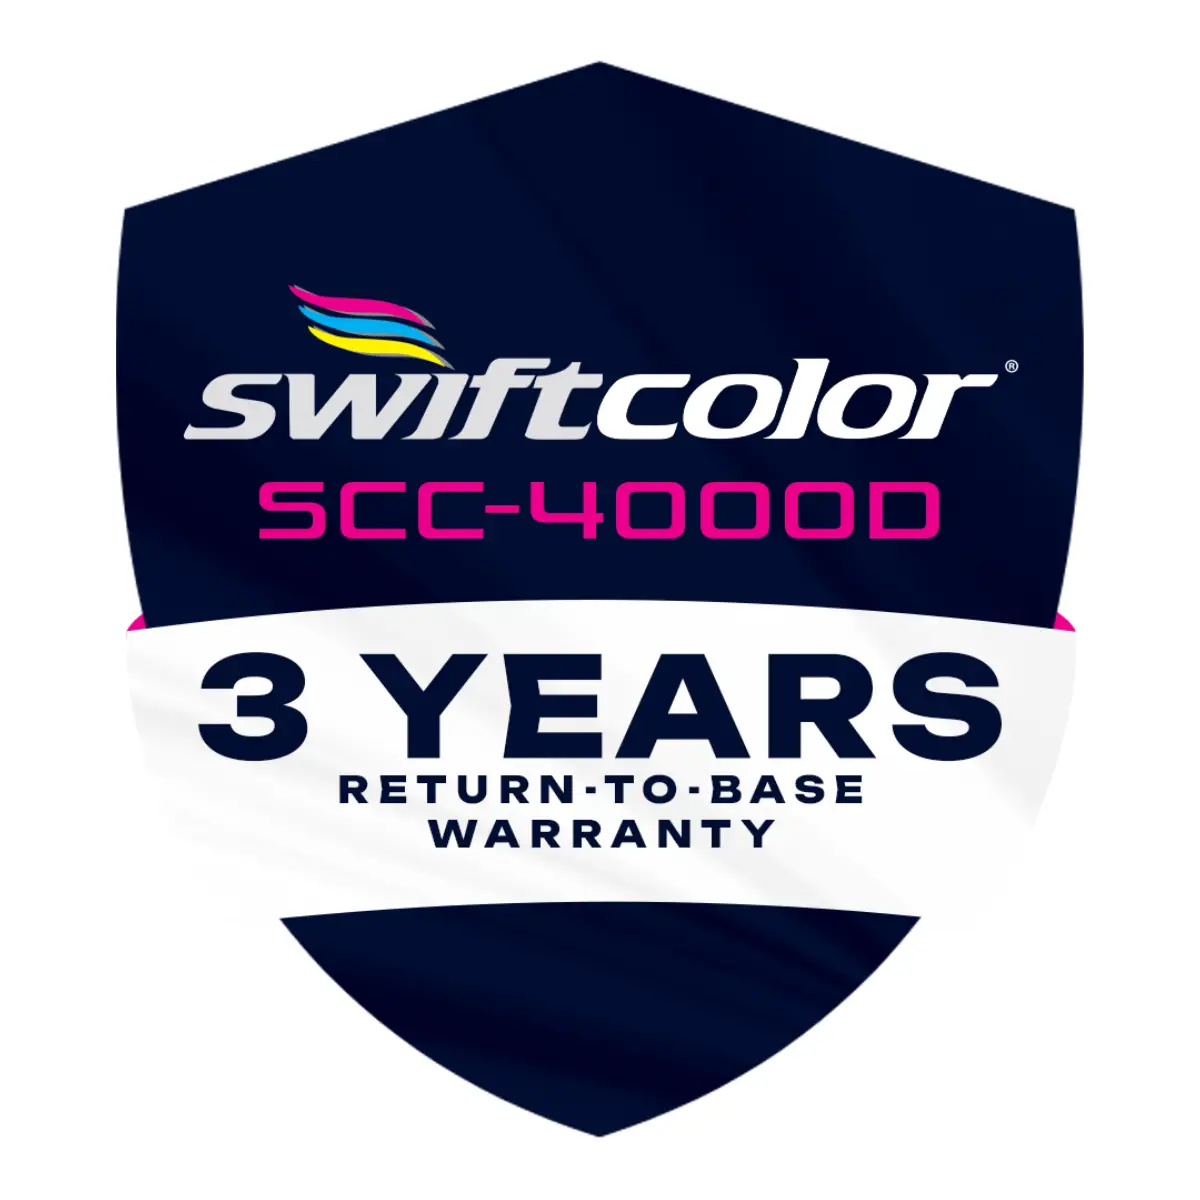 Swiftcolor SCC-4000D 3 Years RTB Warranty MA00MAINTENANCE